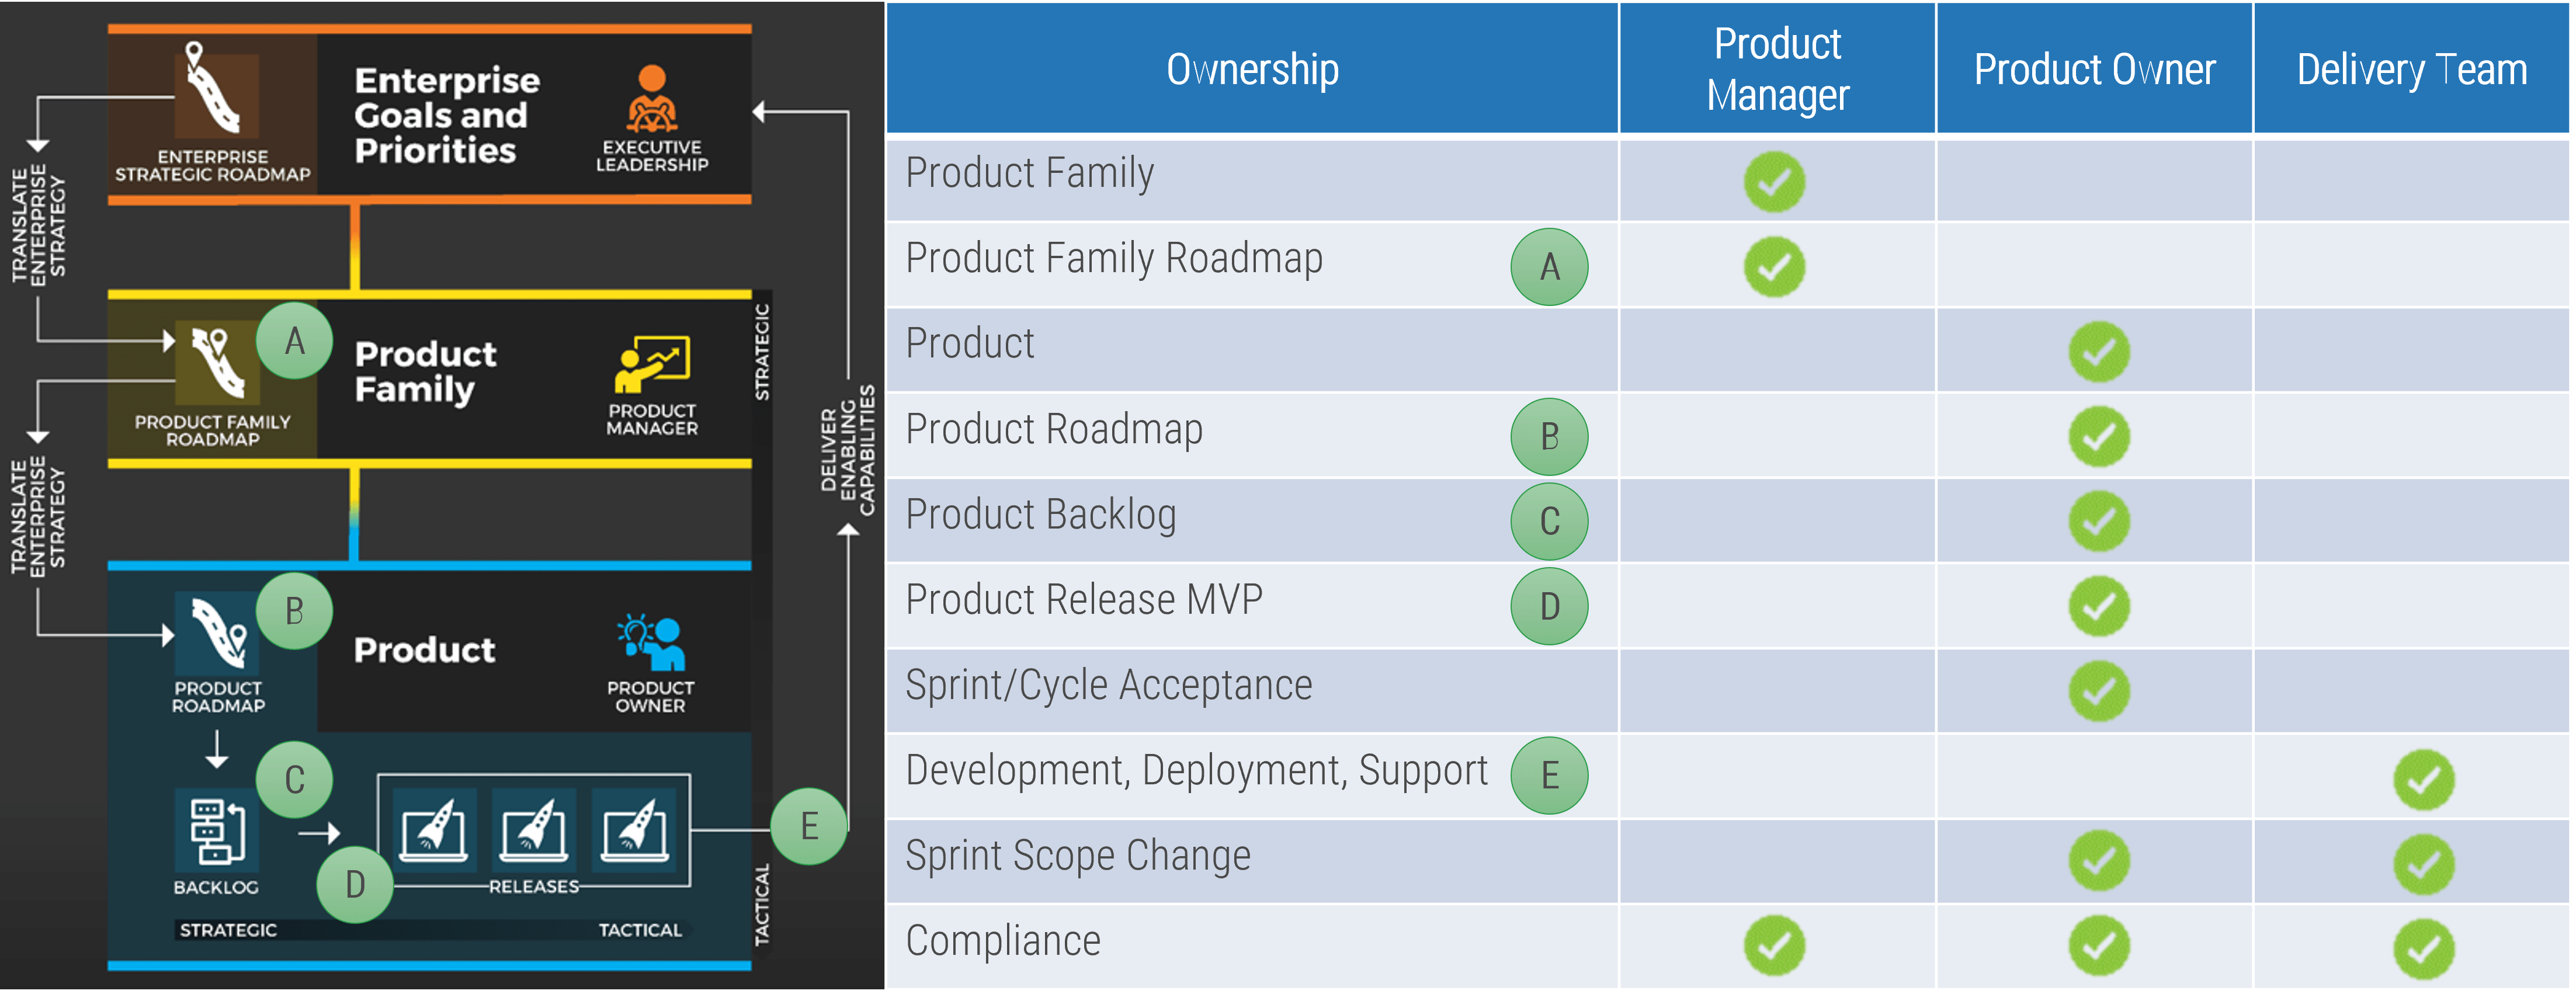 A Table comparing the different roles of product managers to those of product owners.